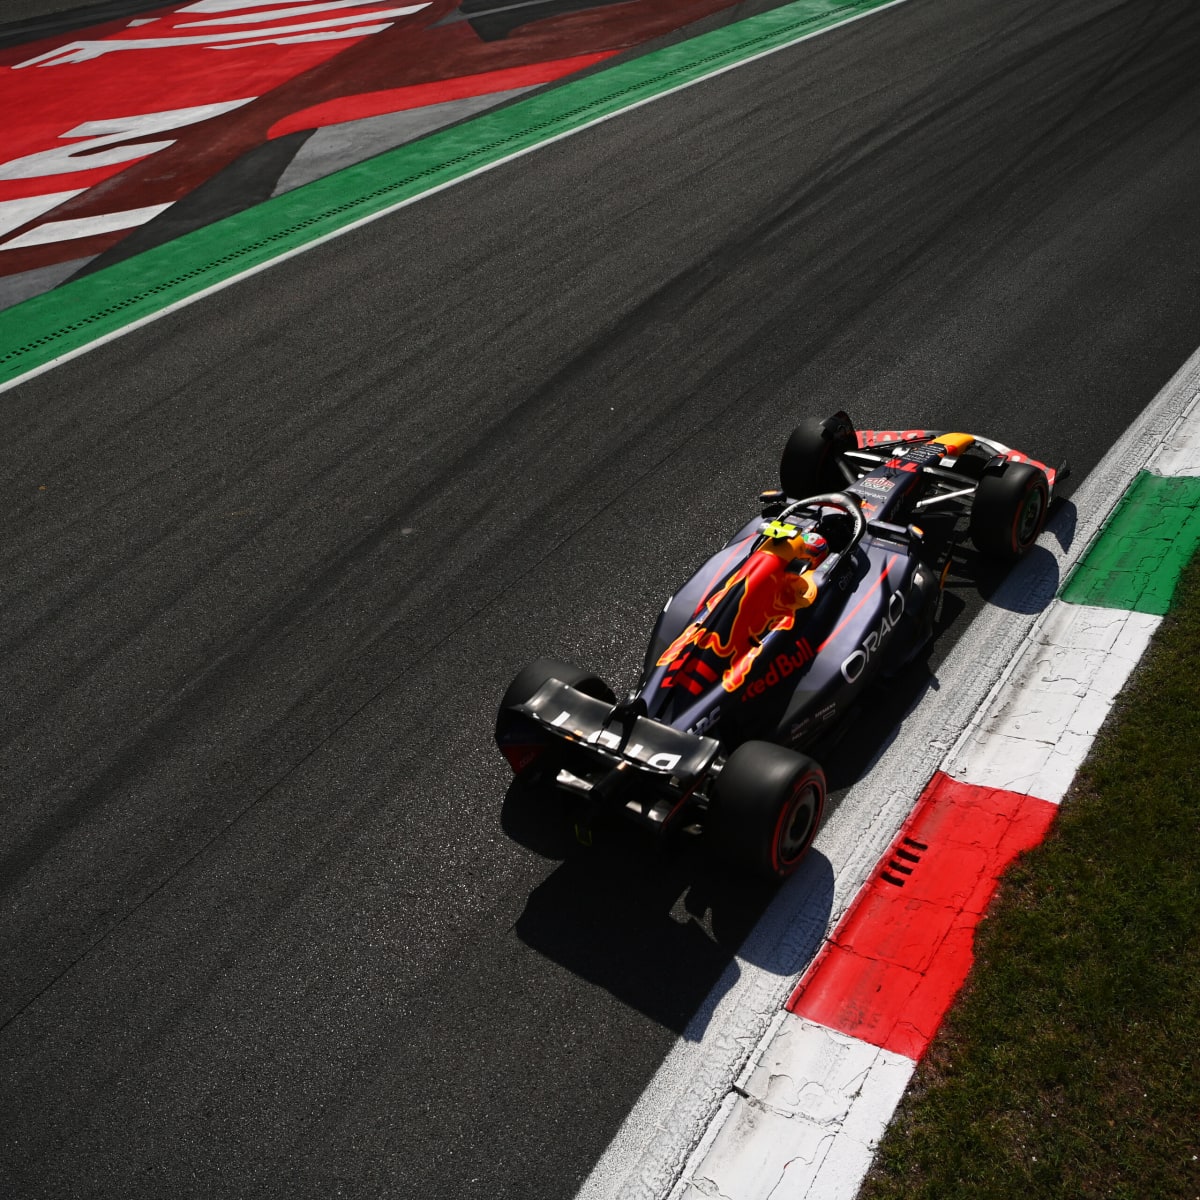 Italian Grand Prix When And How To Watch FP1 FP2 And FP3